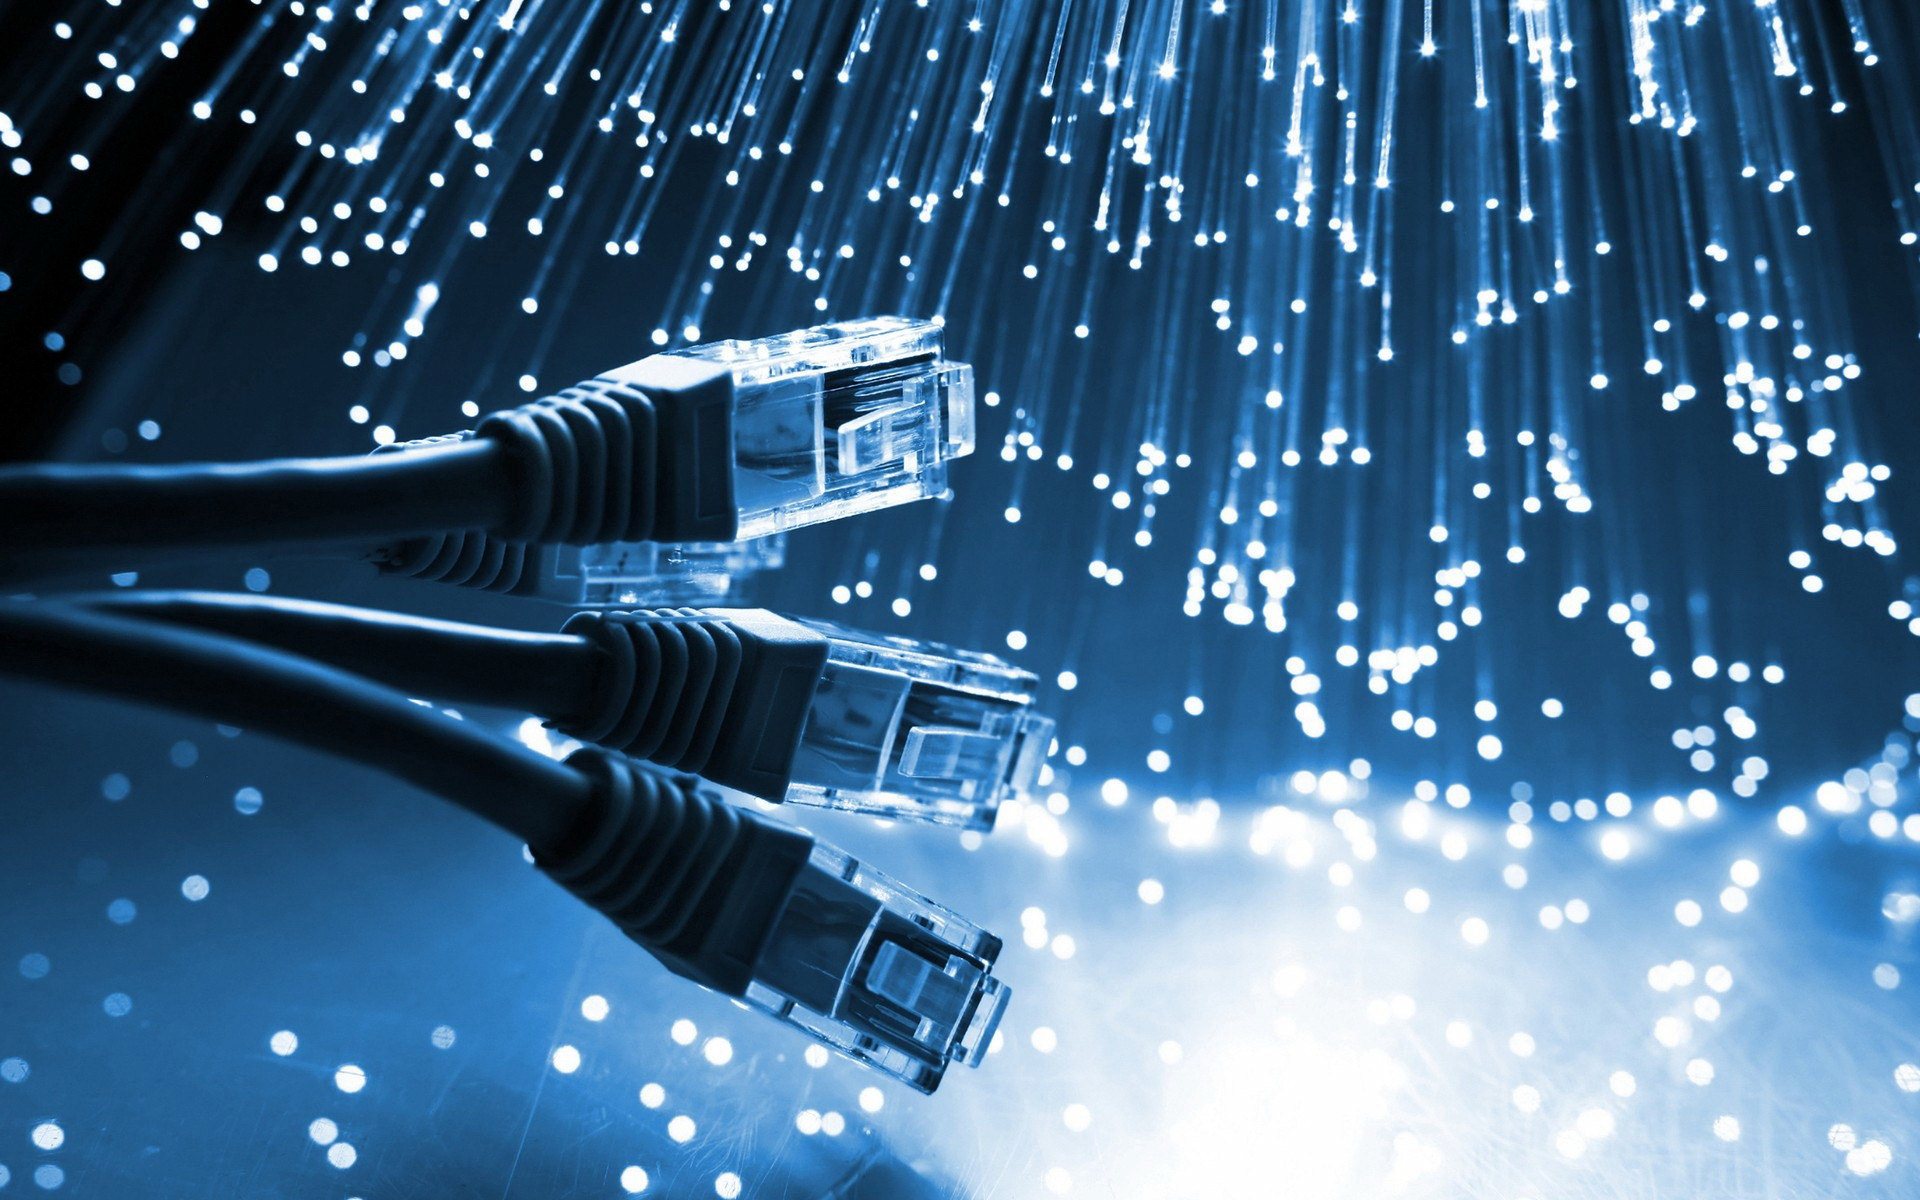 Augusta Network Cabling Services Sytems Contractors Structured Internet Computer Data Voice Telephone VoIP Network Cabling Wiring Installers for Office Commercial CAT3 CAT5e & CAT6